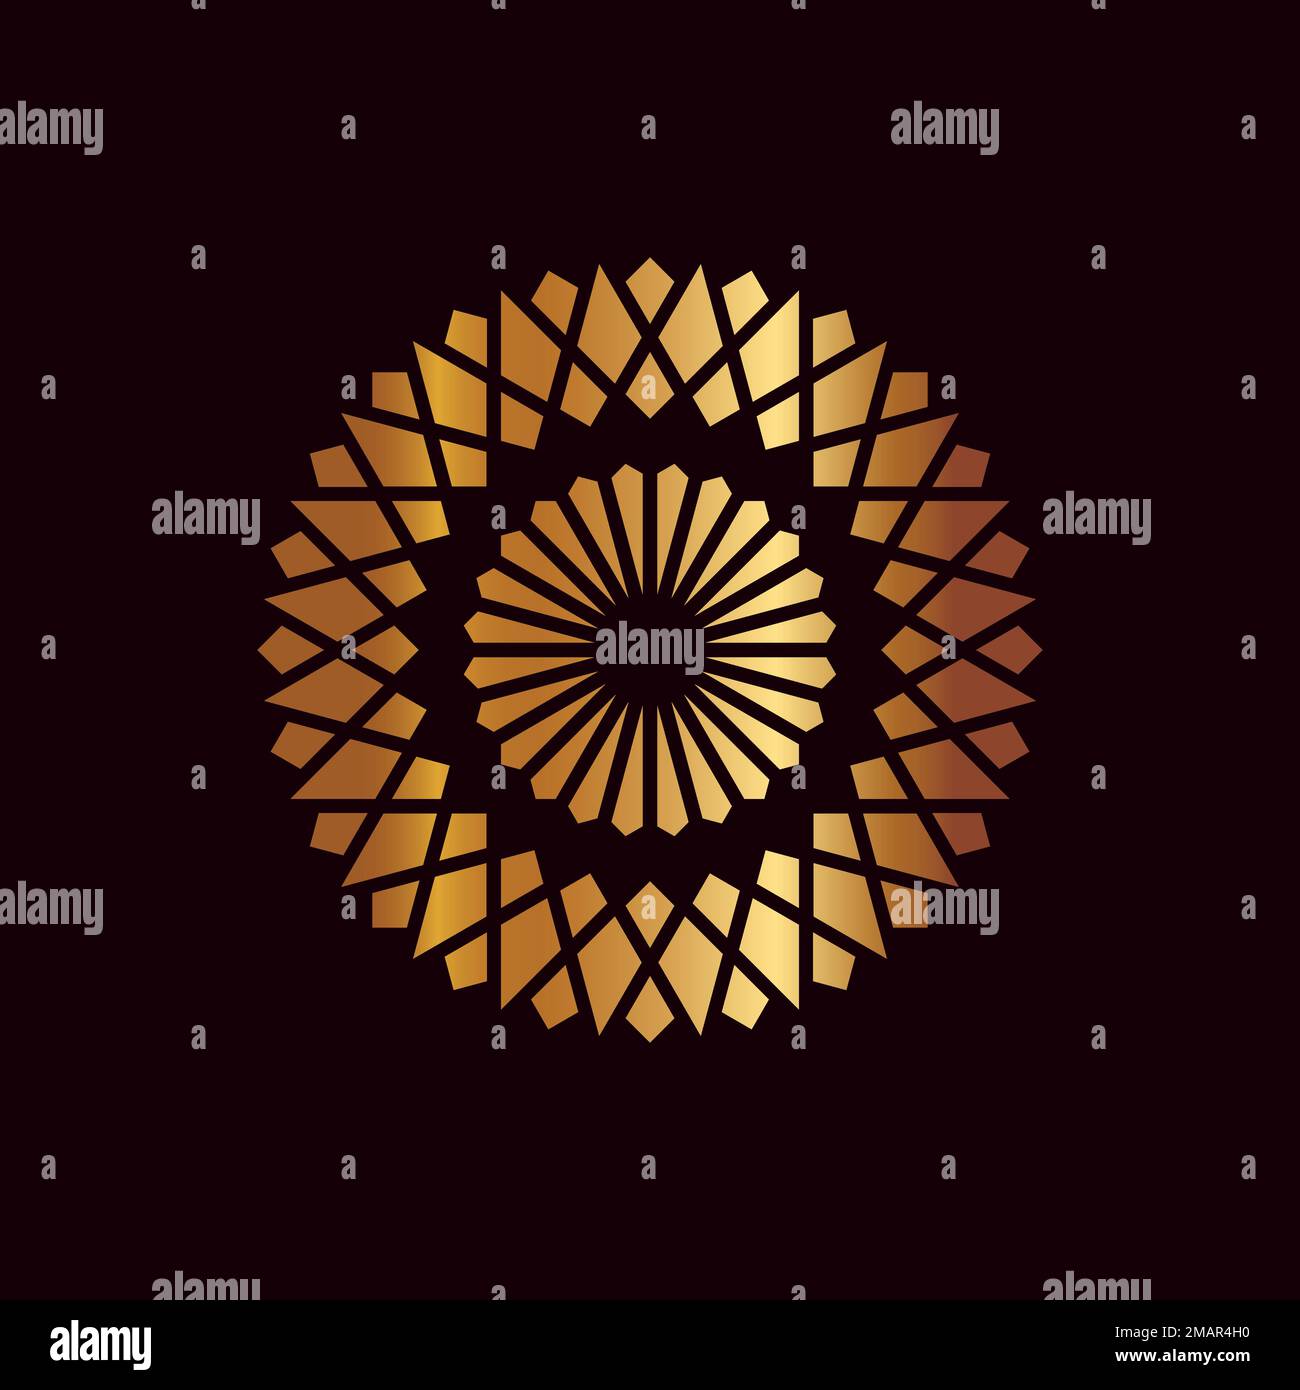 mandala logo element template, suitable for spa, yoga, meditation and spirituality logos with vector eps format. Stock Vector